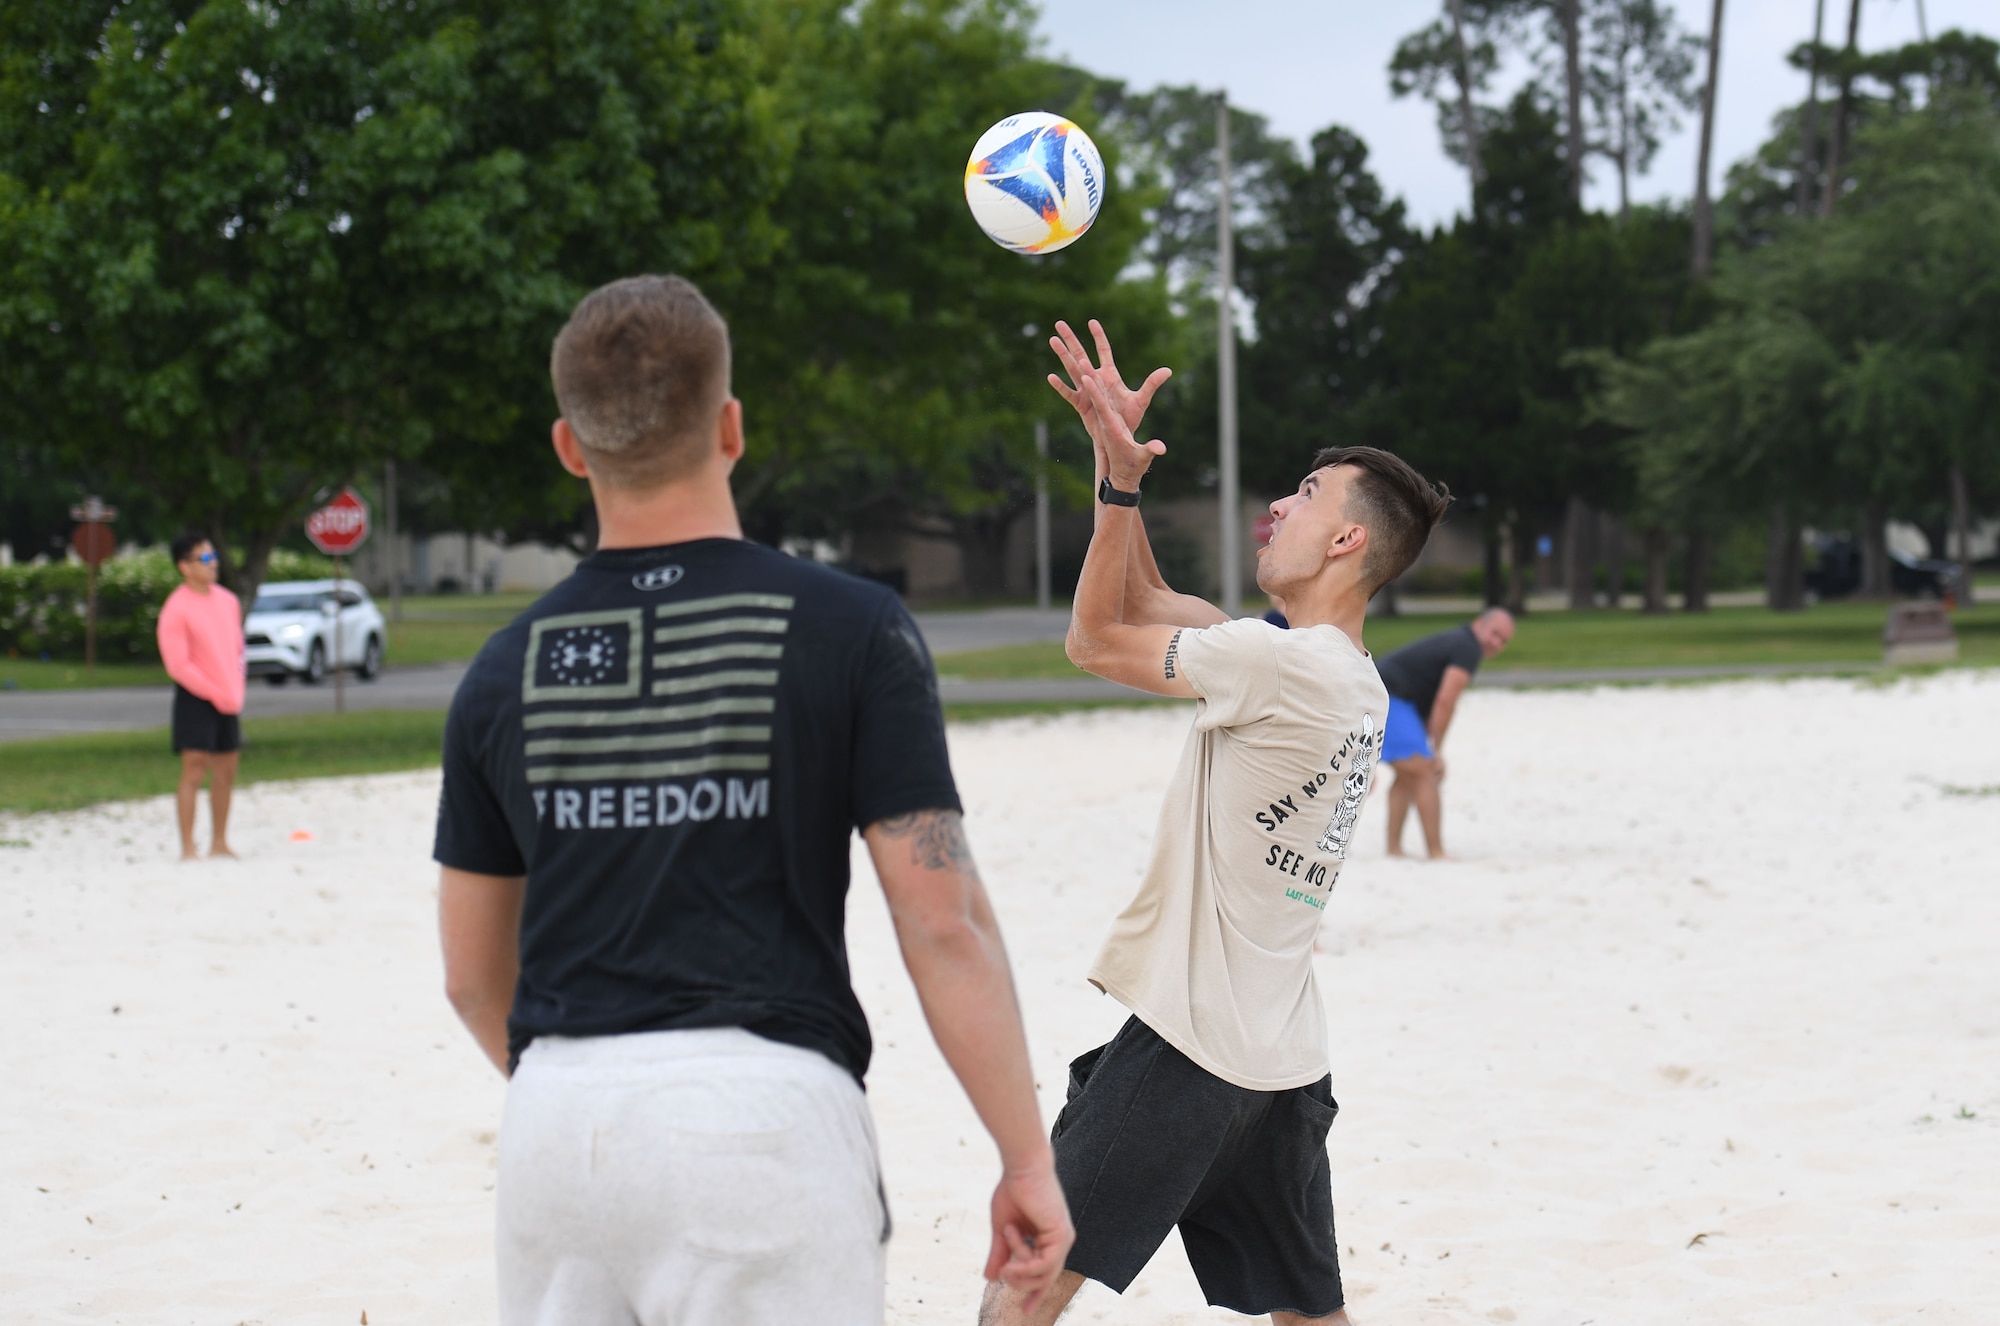 U.S. Marine Private First Class Caleb Simmons, Keesler Marine Detachment student, hits a volleyball during the Sexual Assault and Awareness Prevention Month volleyball tournament at Keesler Air Force Base, Mississippi, April 29, 2022. More than 20 teams competed in the event, which was held in acknowledgment of Sexual Assault and Awareness Prevention Month throughout April. (U.S. Air Force photo by Kemberly Groue)